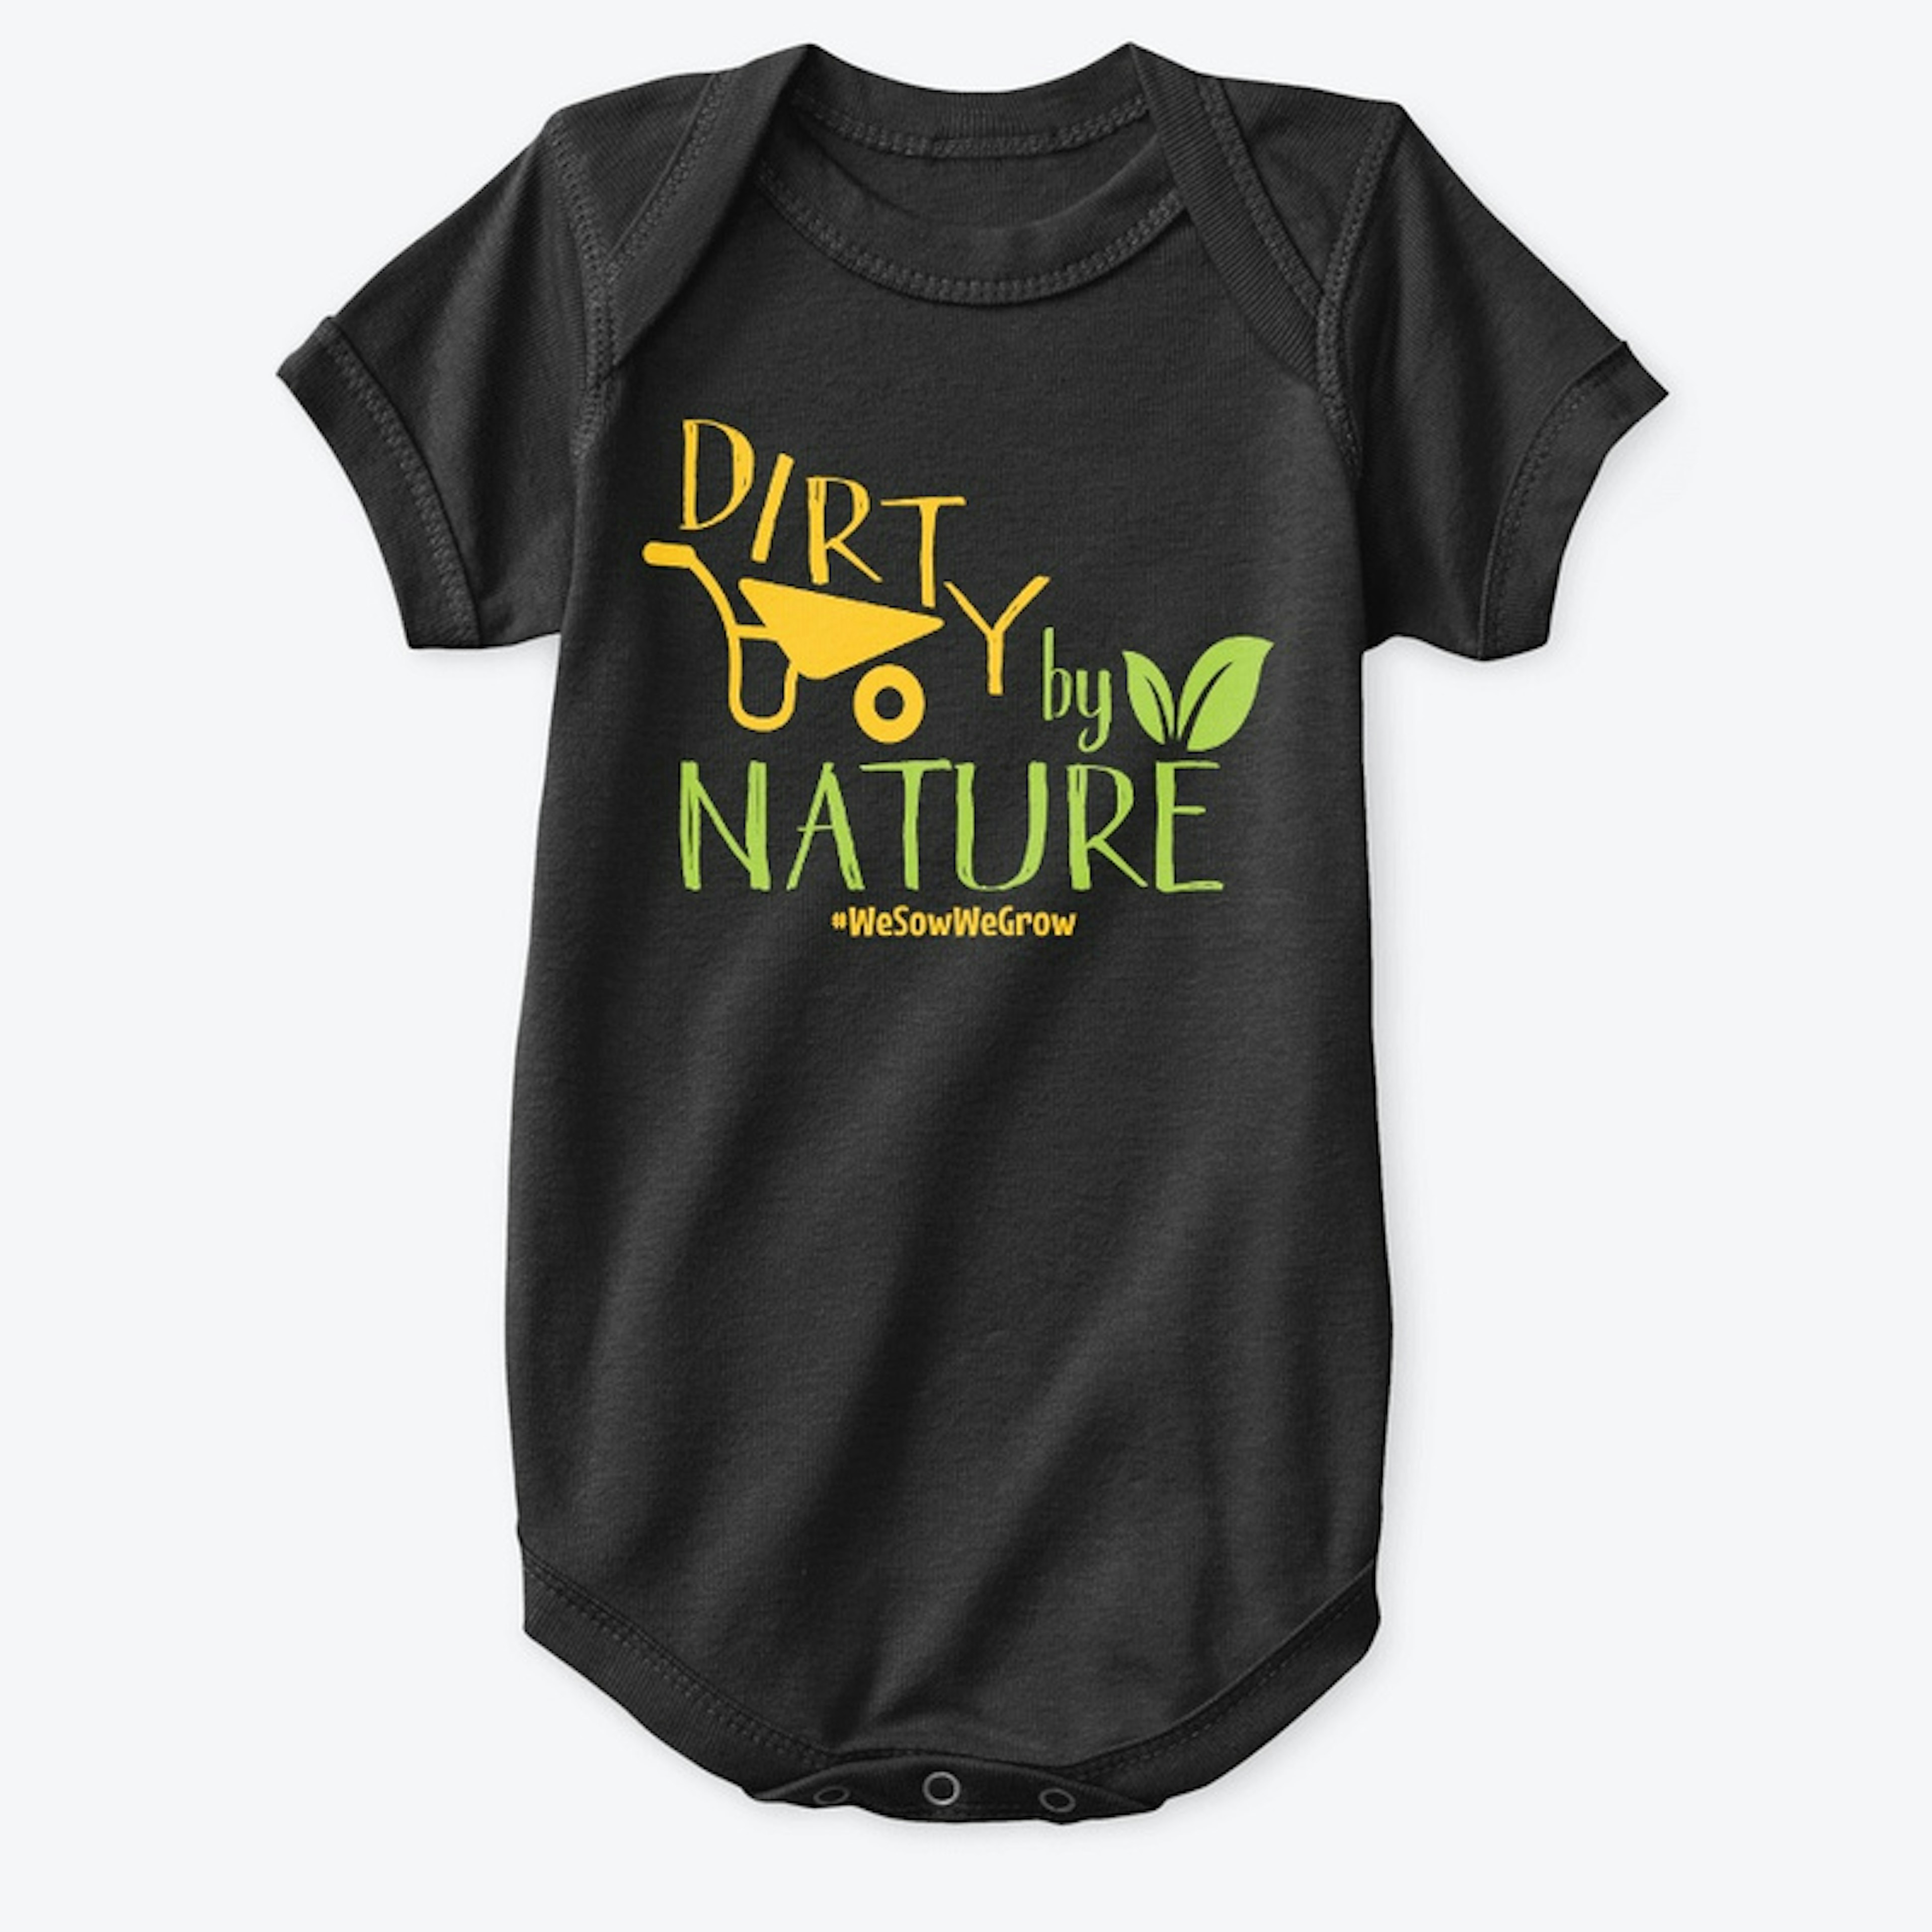 Pint Sized Dirty by Nature 